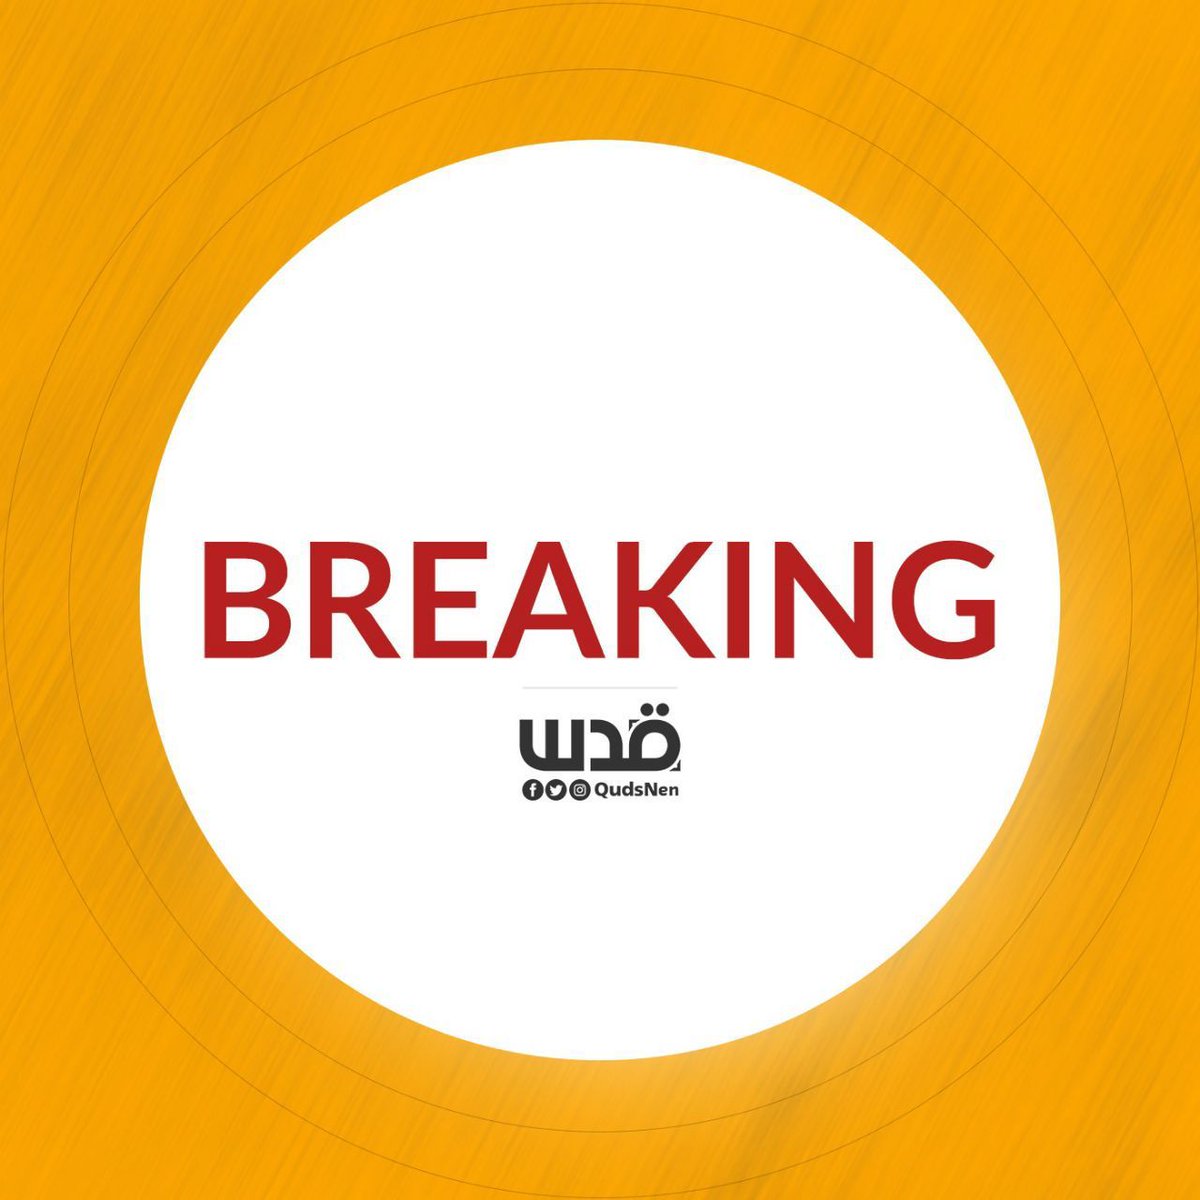 BREAKING| Israeli forces open fire at journalists, who are covering clashes between Israeli occupation forces and resistance fighters in the West Bank city of Tulkarm.